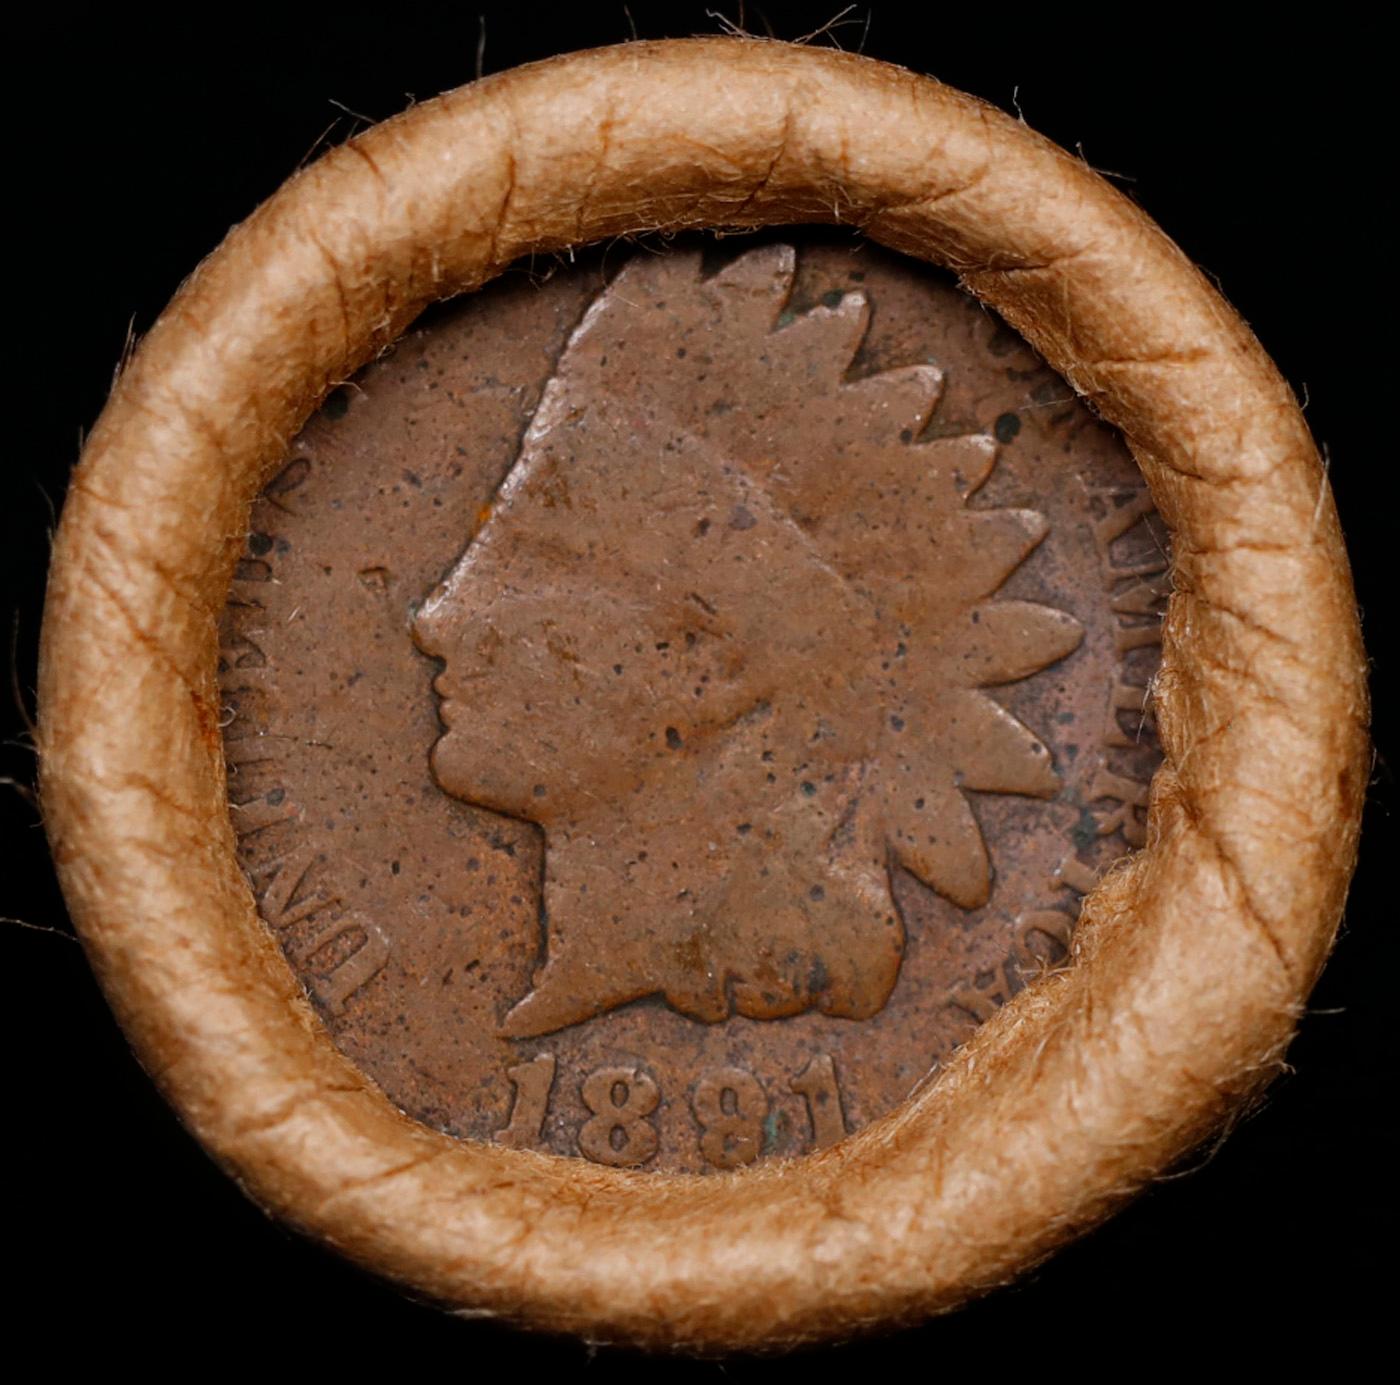 Lincoln Wheat Cent 1c Mixed Roll Orig Brandt McDonalds Wrapper, 1919-d end, 1891 Indian other end